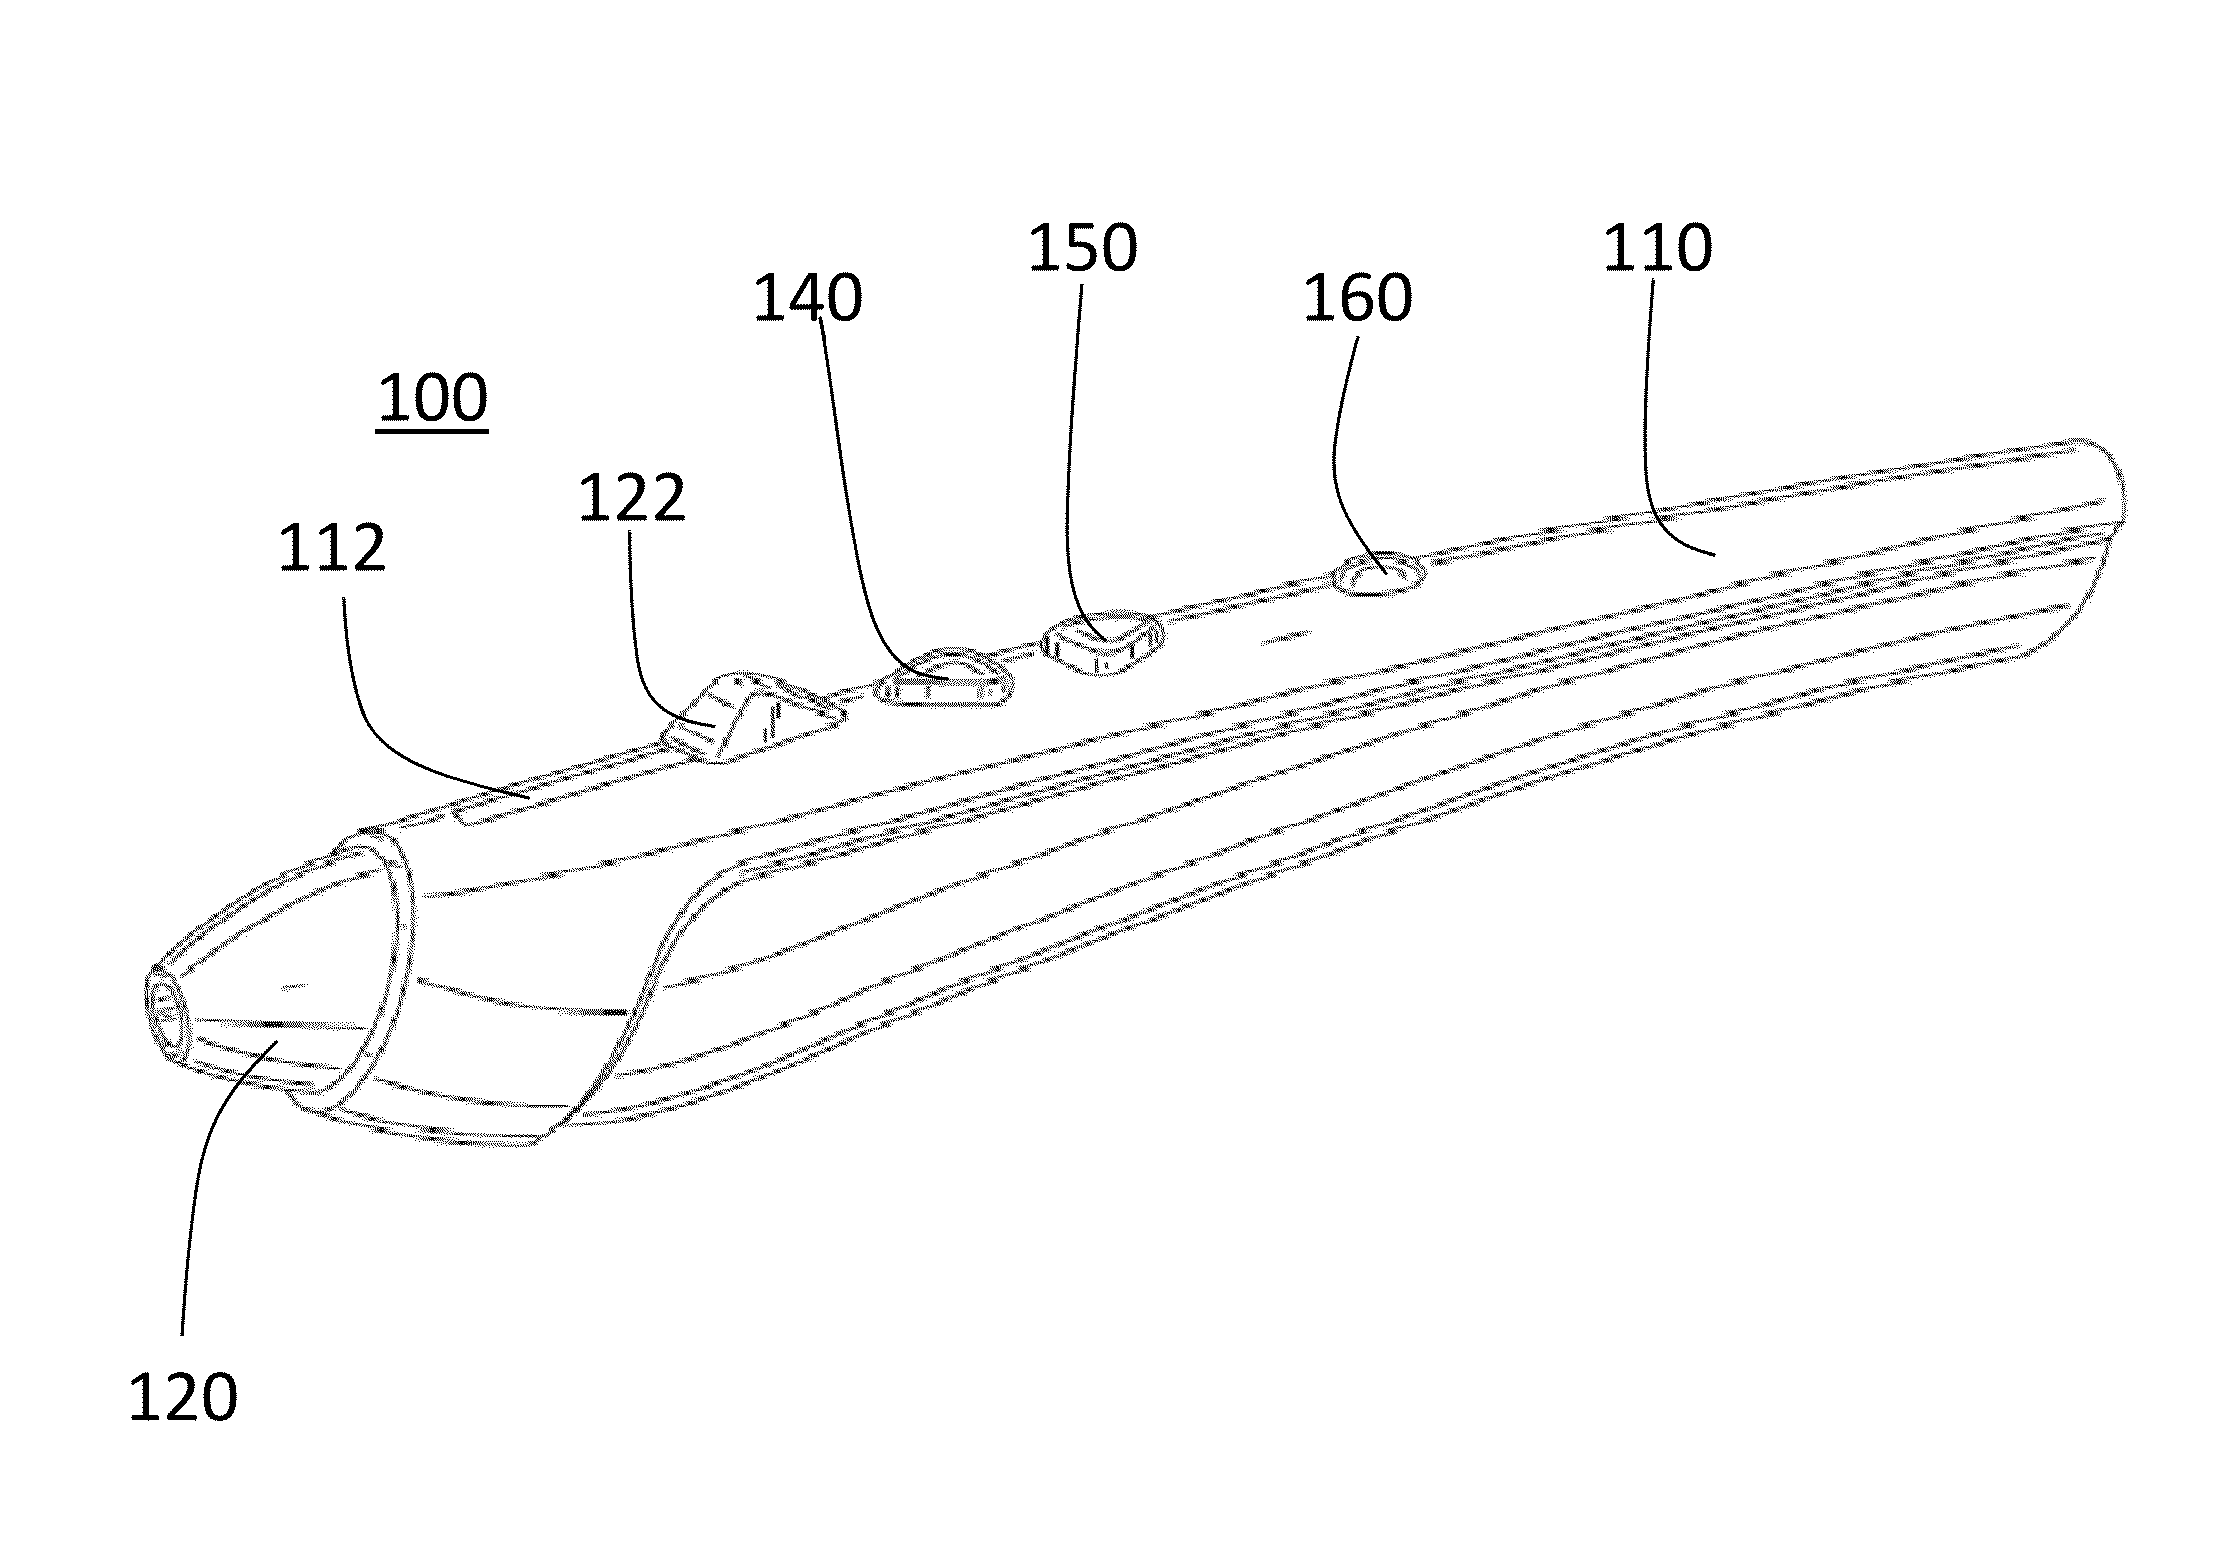 System and Method for Electrosurgical Conductive Gas Cutting for Improving Eschar, Sealing Vessels and Tissues